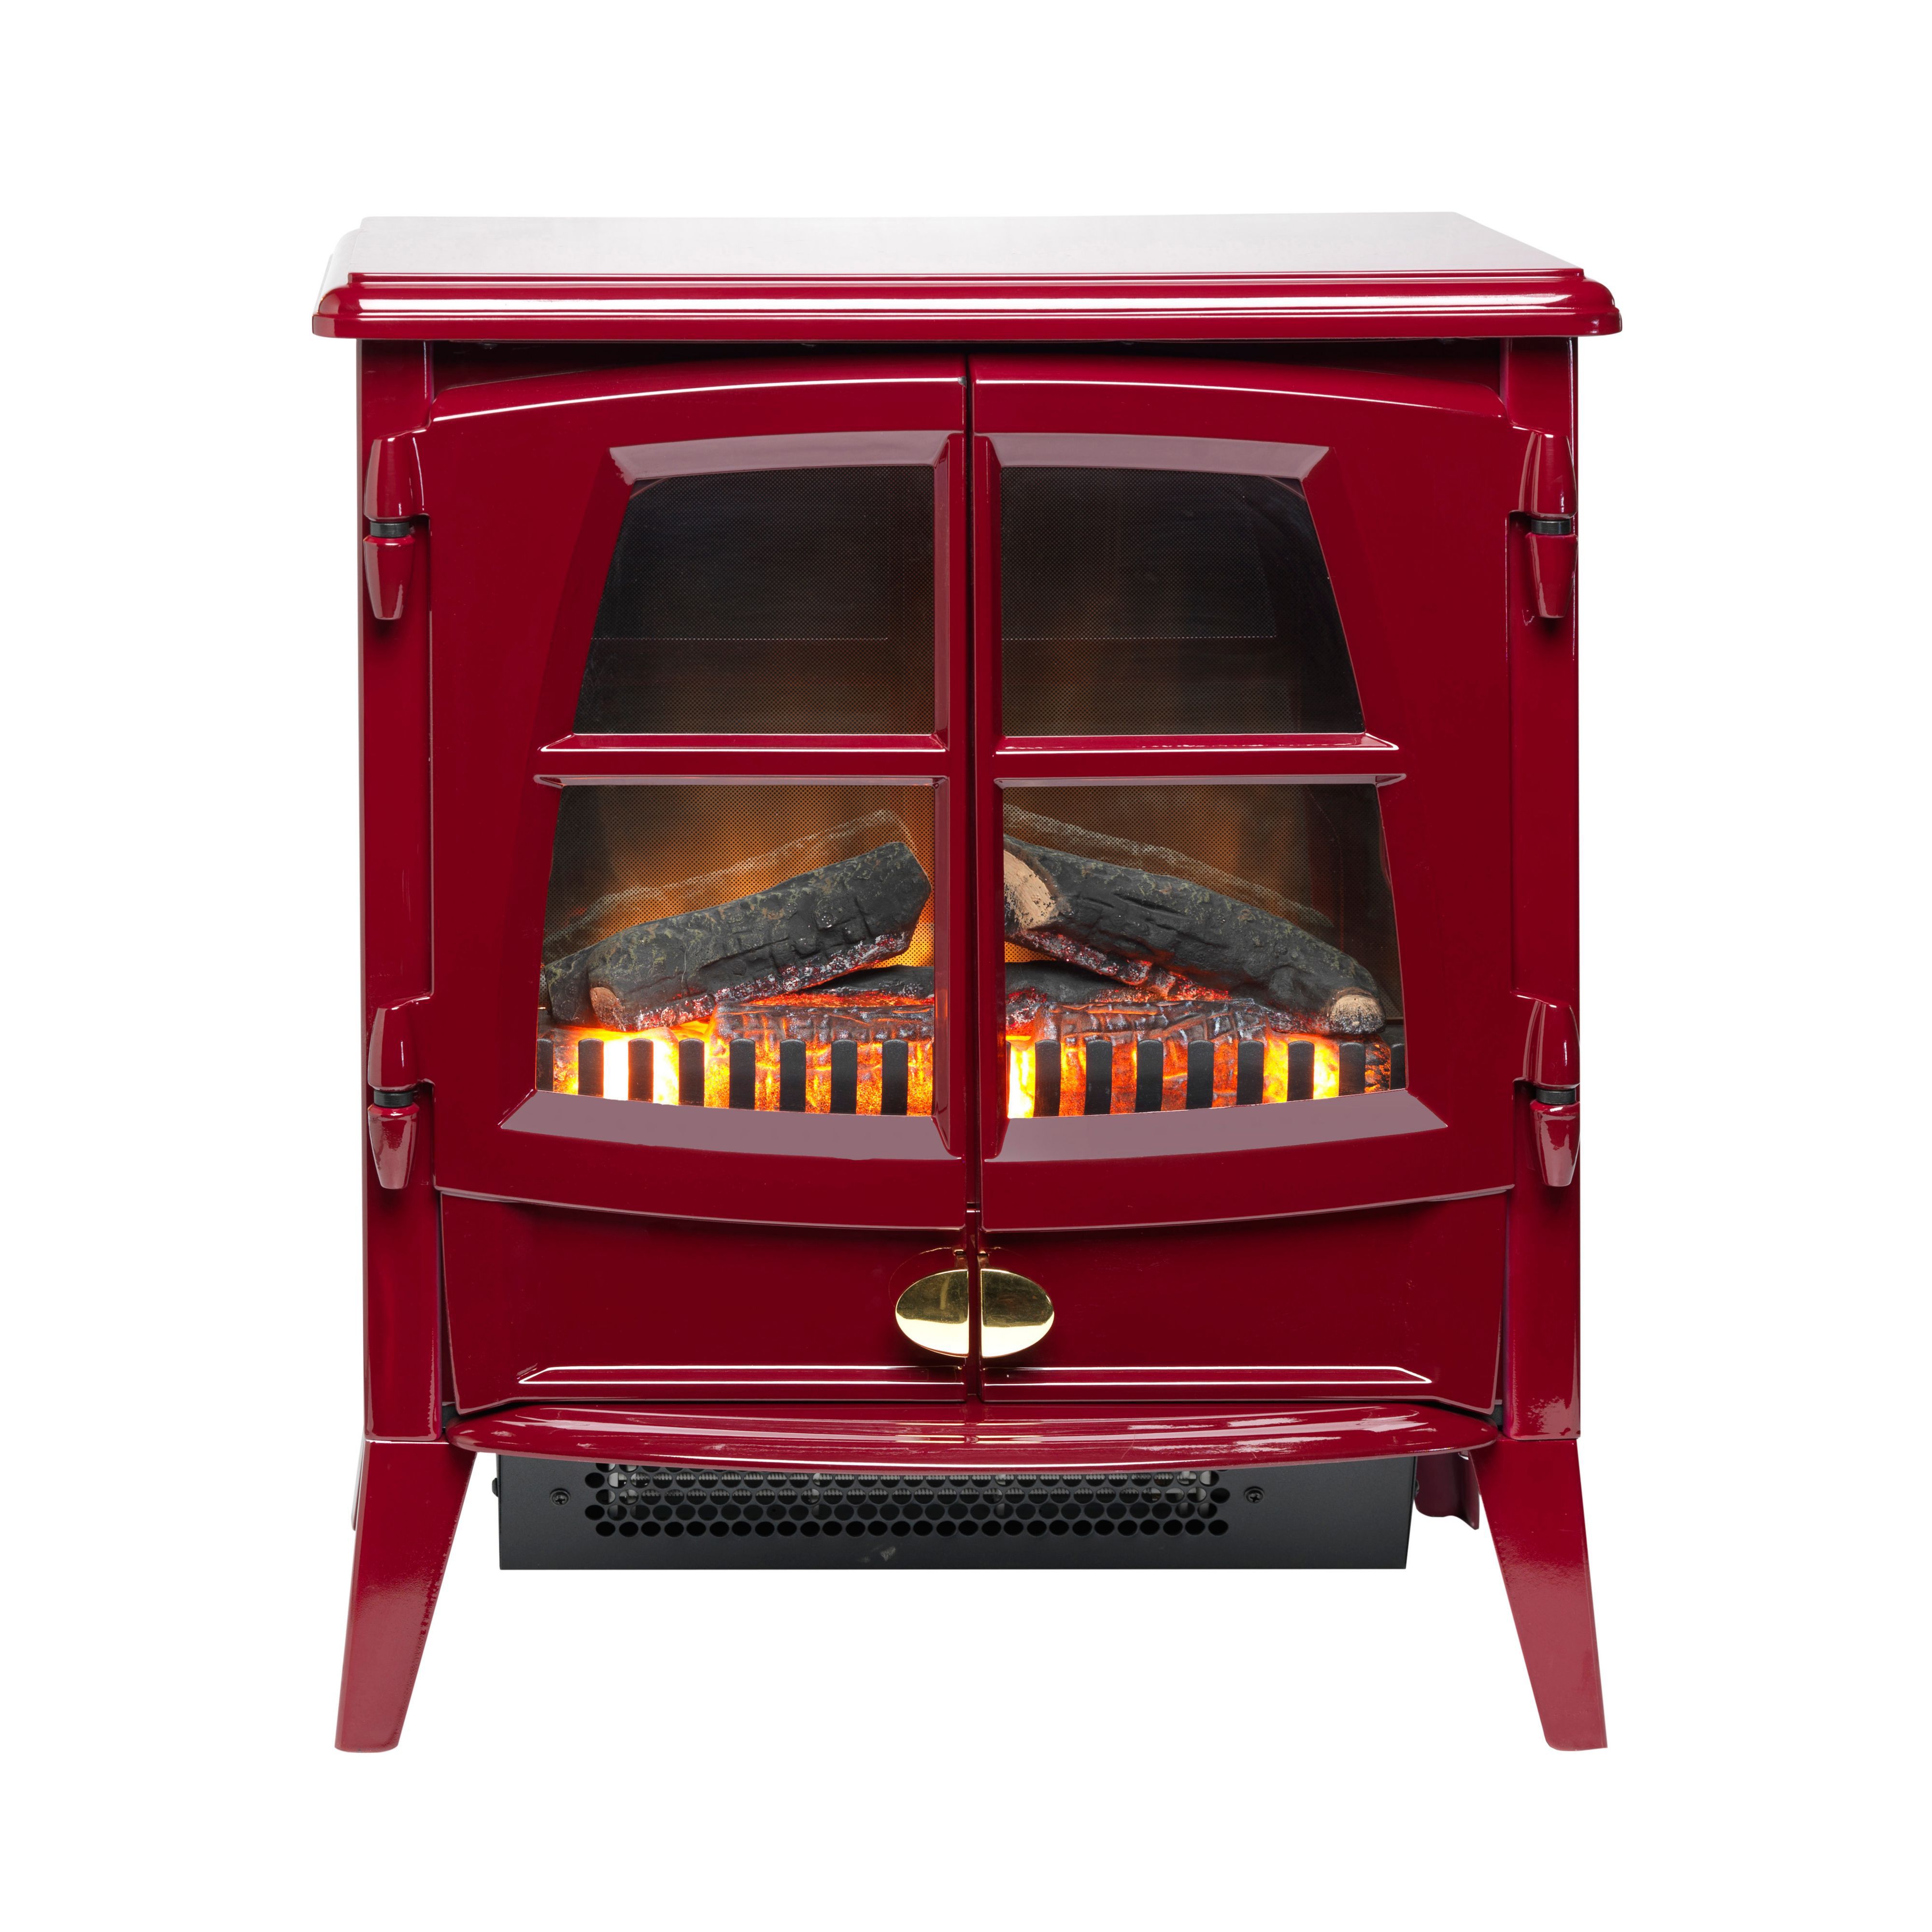 Dimplex Jazz Red Electric stove